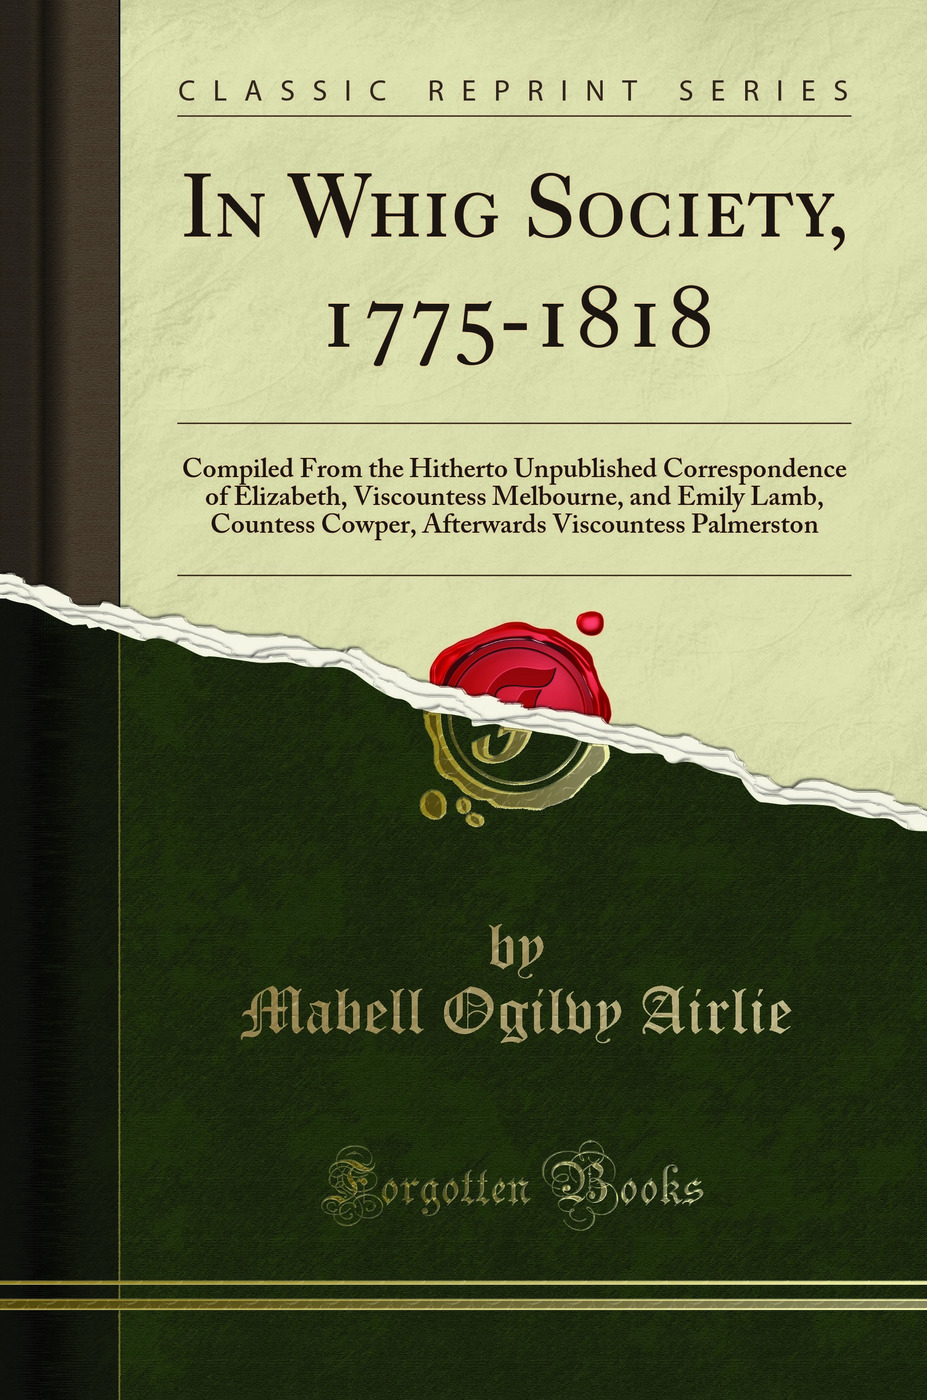 In Whig Society, 1775-1818 (Classic Reprint) - Mabell Ogilvy Airlie